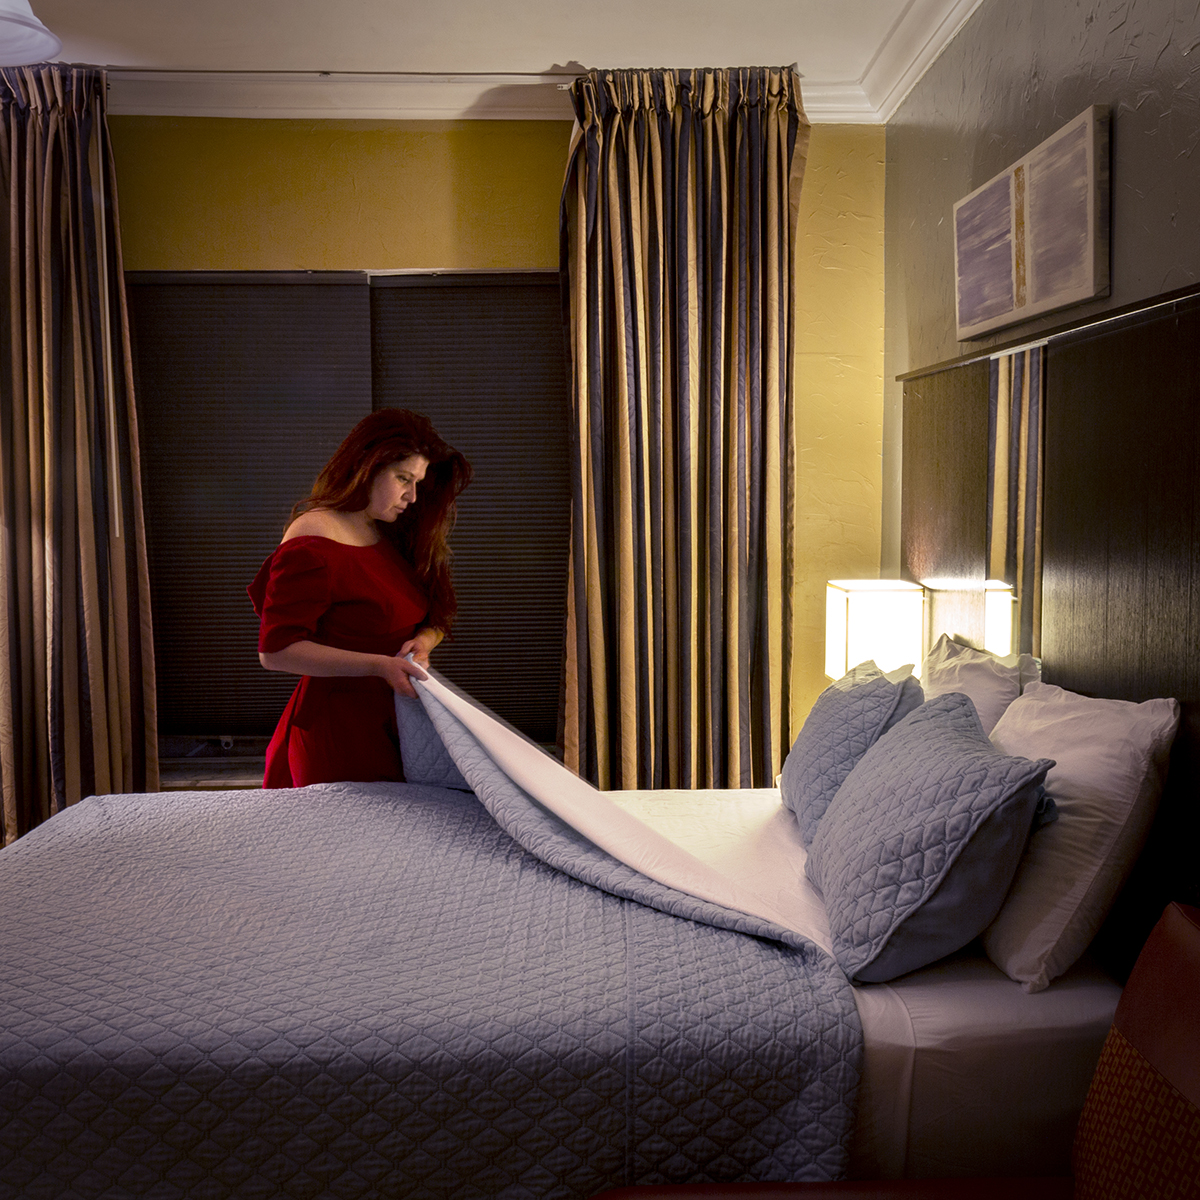 a woman in a red dress stands in a hotel room. She is pulling back the blue covers on the bed. The blinds on the window behind her are closed and a lamp on the bedside table is turned on.  